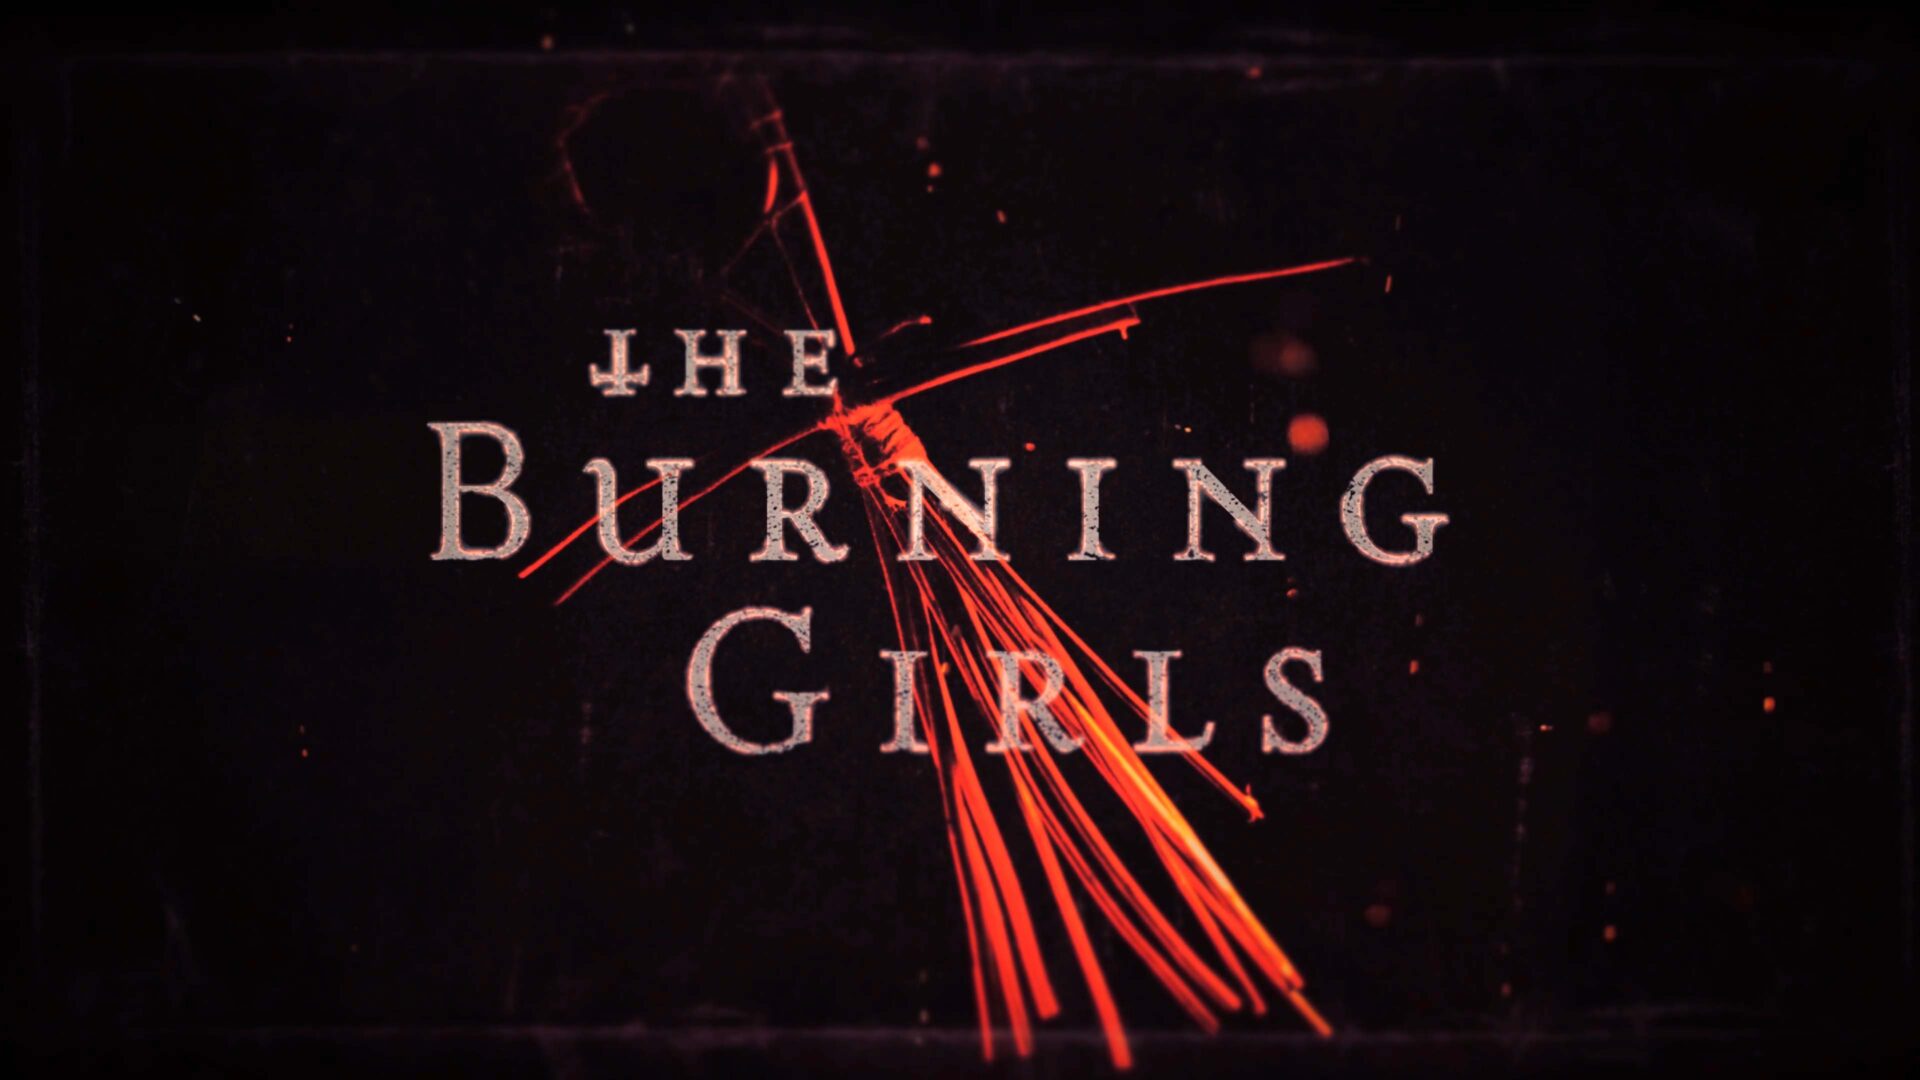 Peter_Anderson_Studio-The_Burning_Girls-Title_Sequence_20